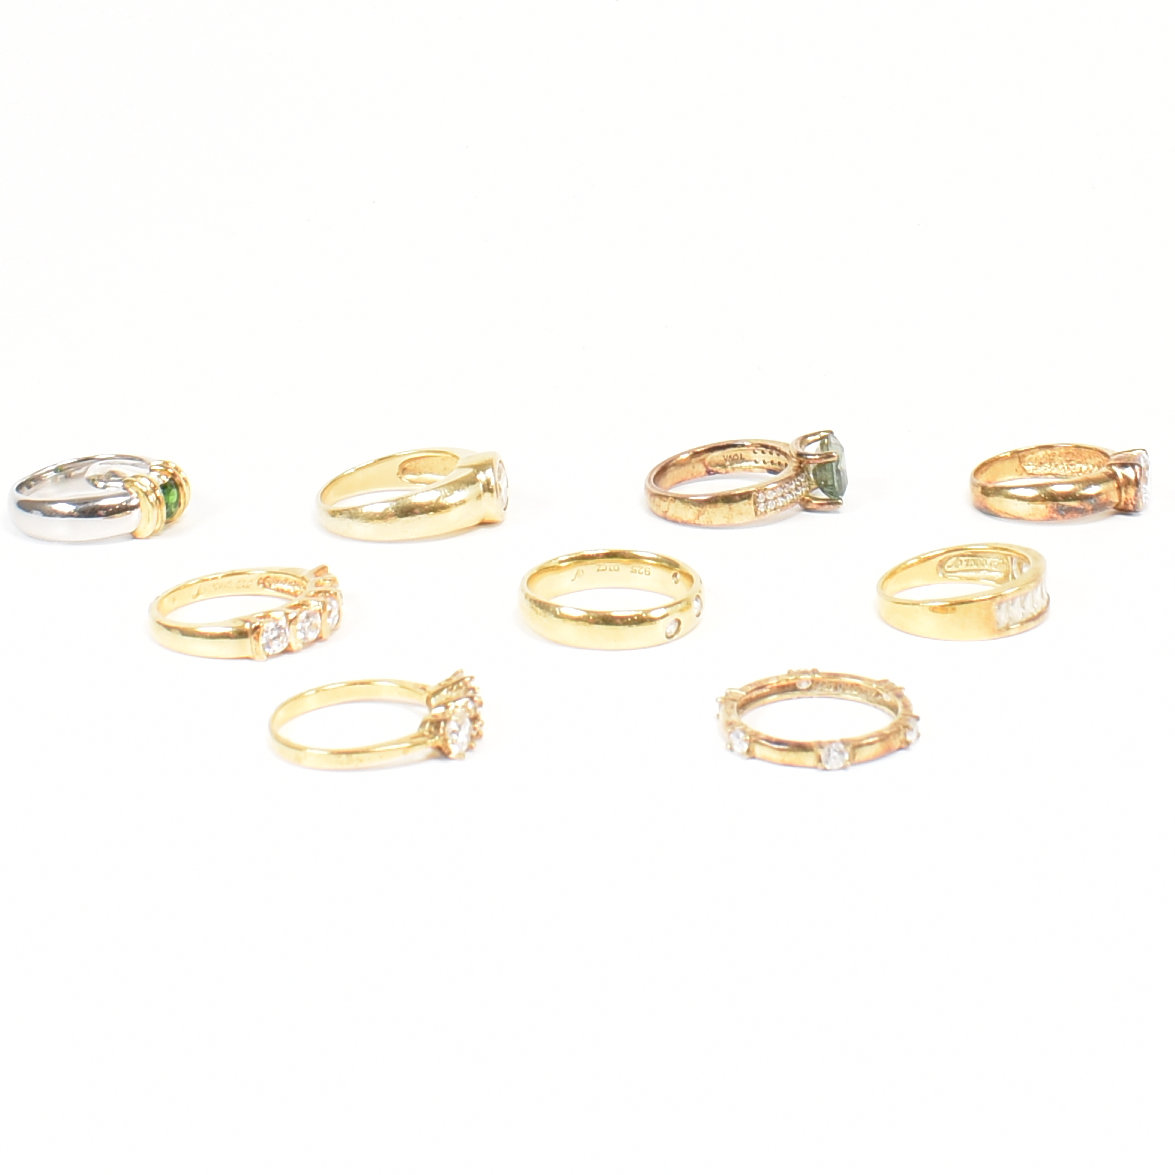 COLLECTION OF GOLD ON 925 SILVER CZ RINGS - Image 3 of 5